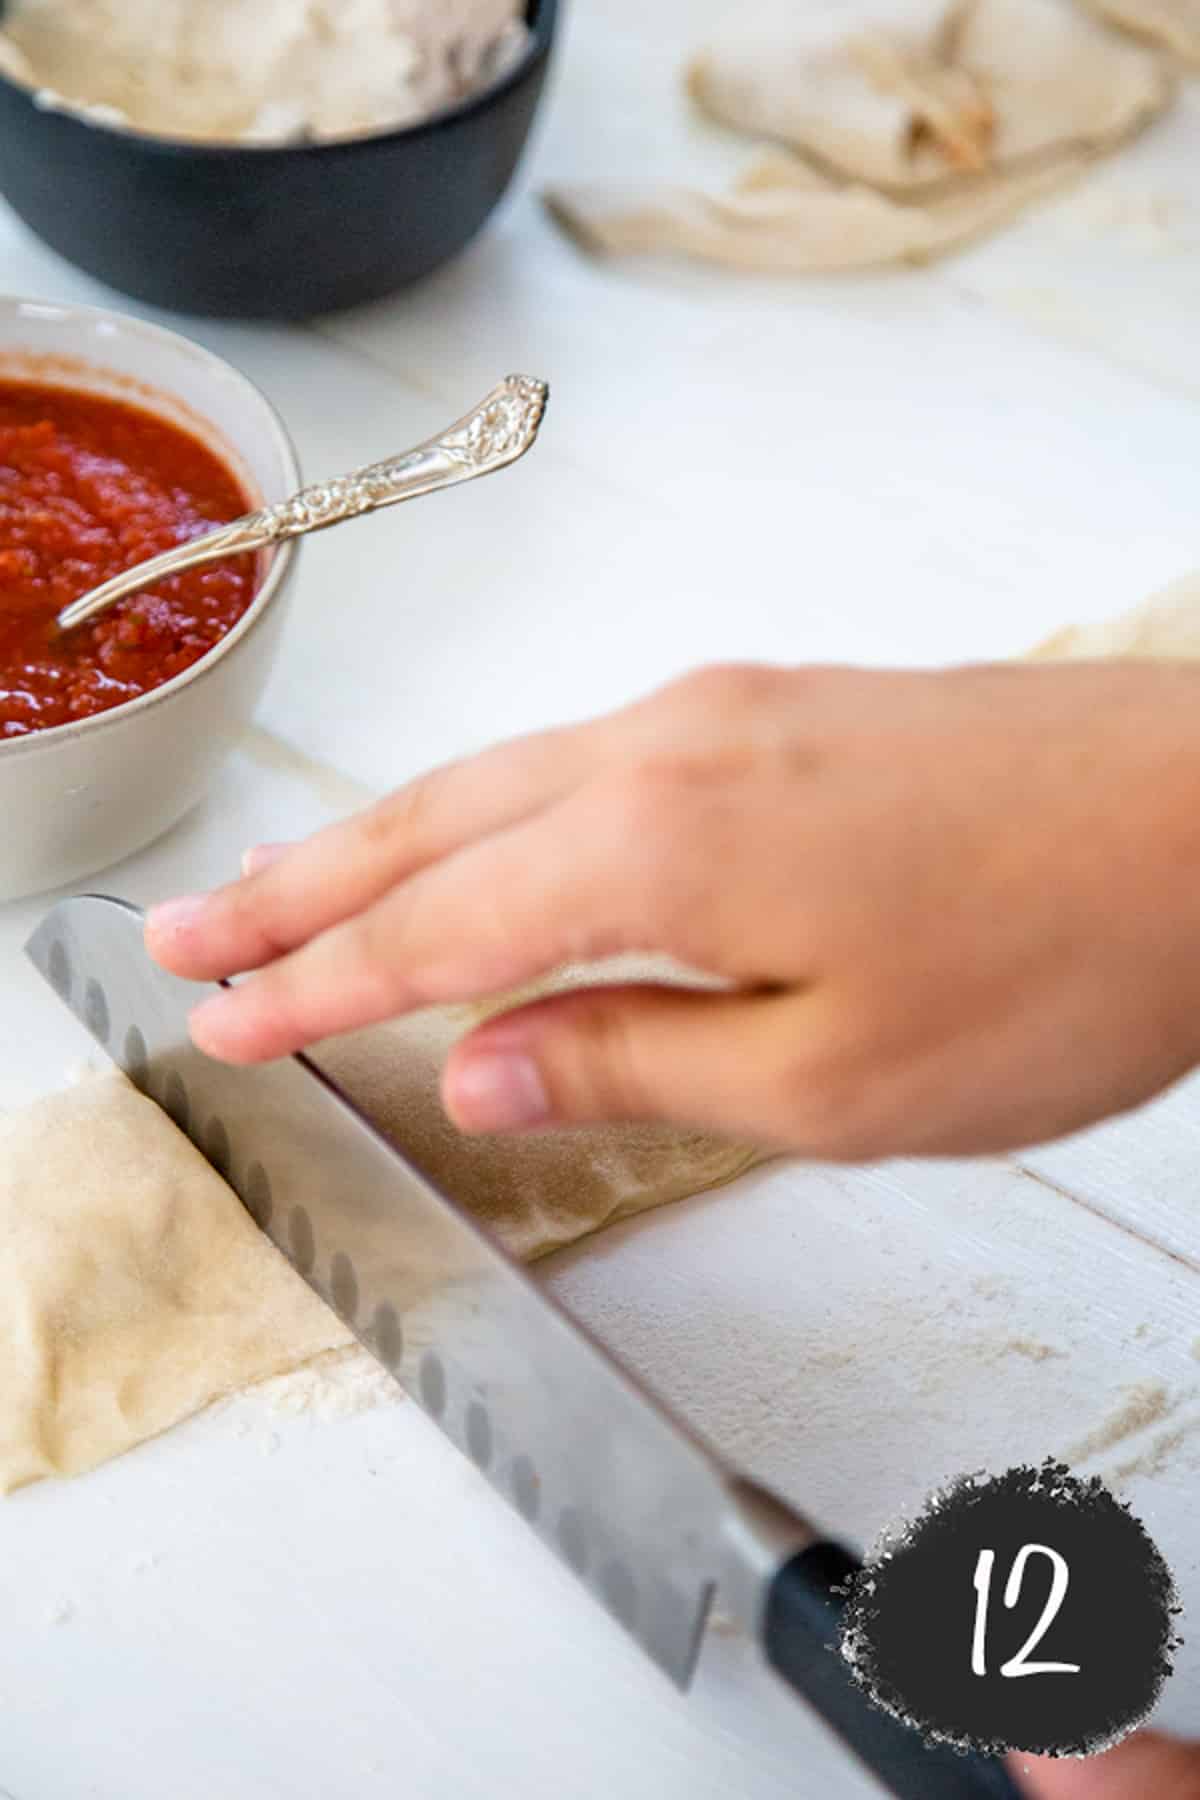 A hand cutting unbaked pizza rolls.